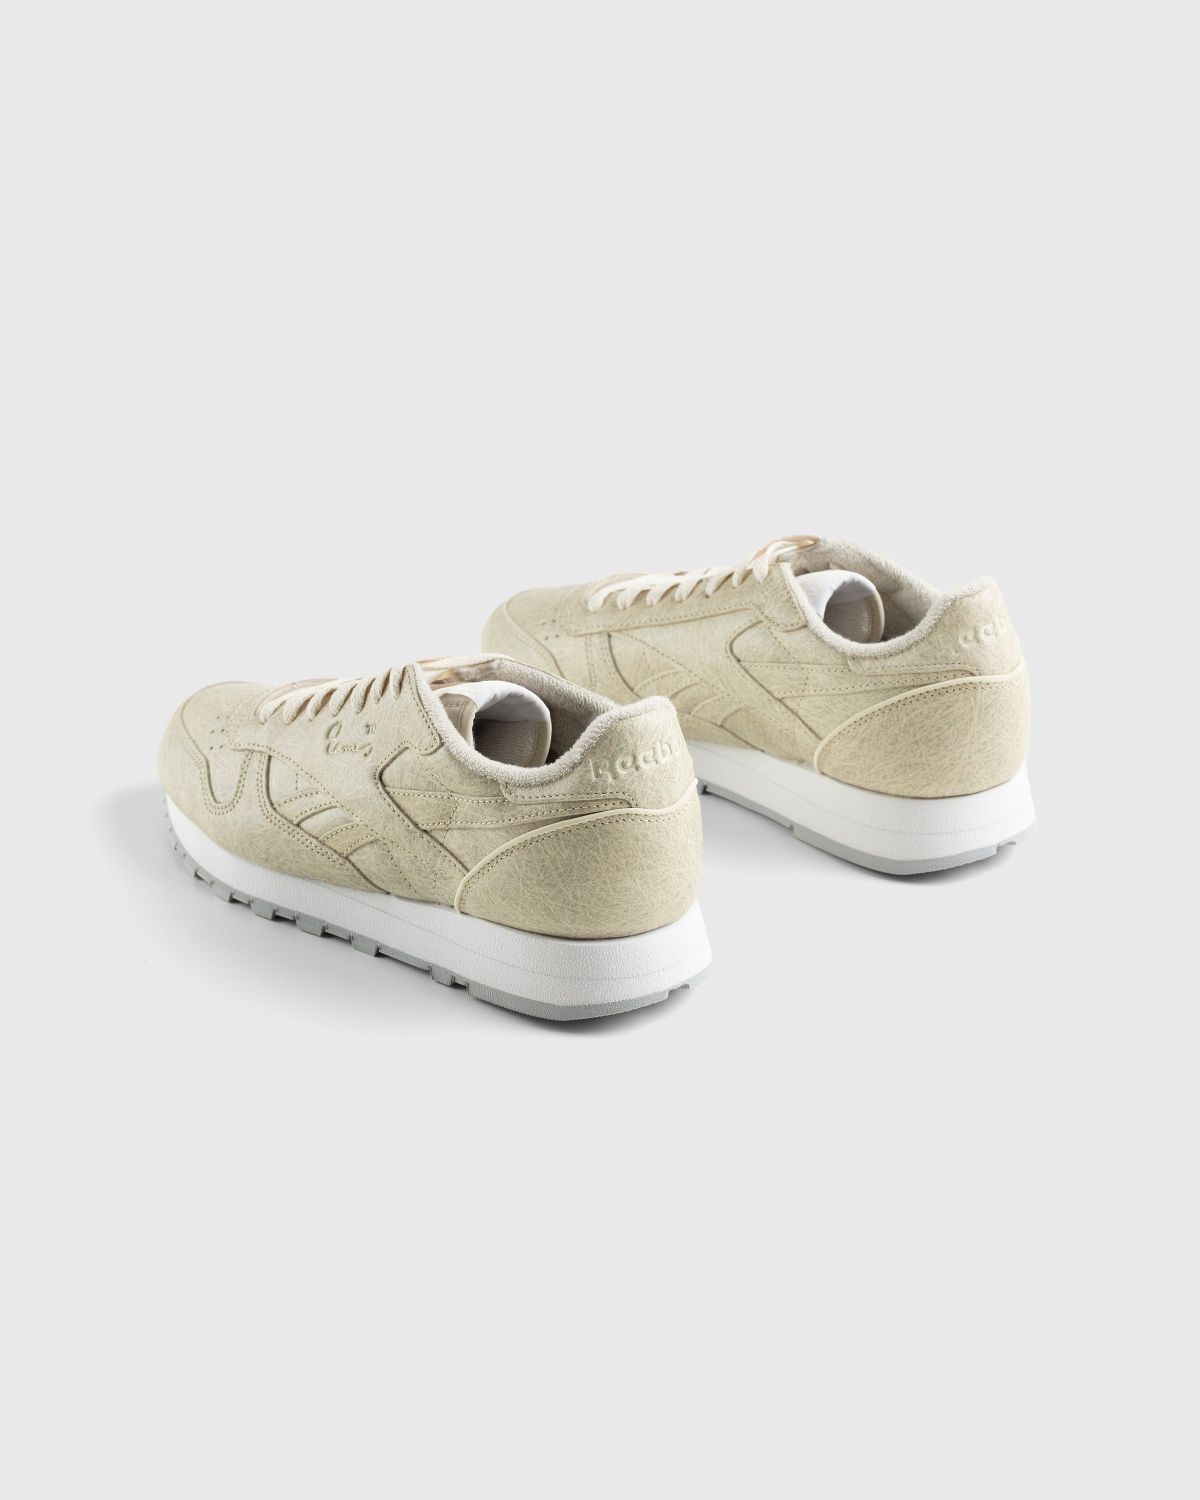 Reebok – Eames Classic Leather Sand - Low Top Sneakers - Beige - Image 4